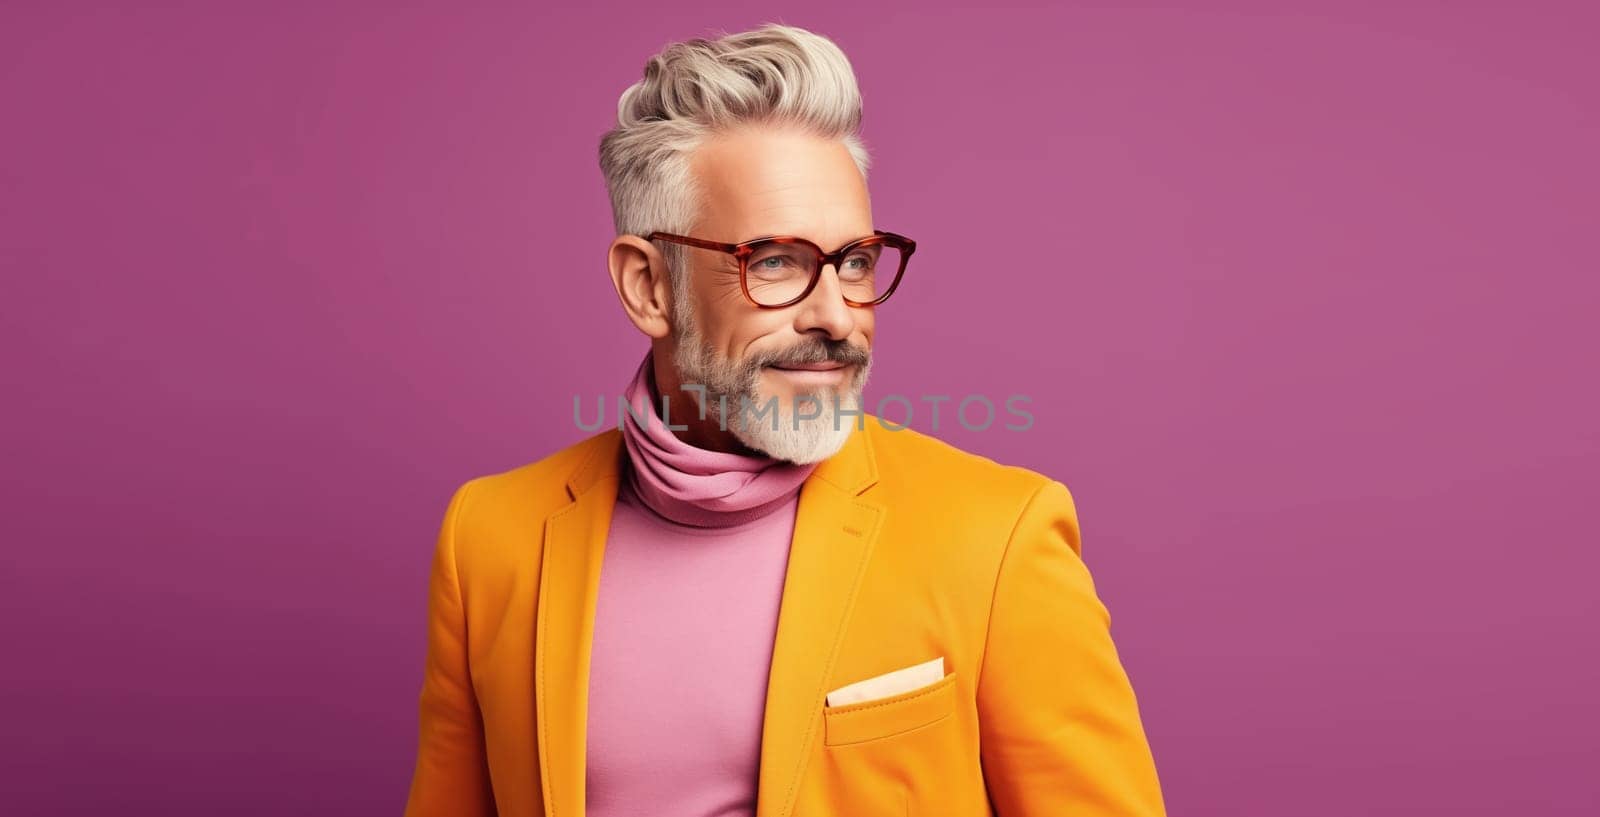 Fashionable portrait of stylish handsome mature man in yellow business suit, glasses looking away posing on colorful pink studio background